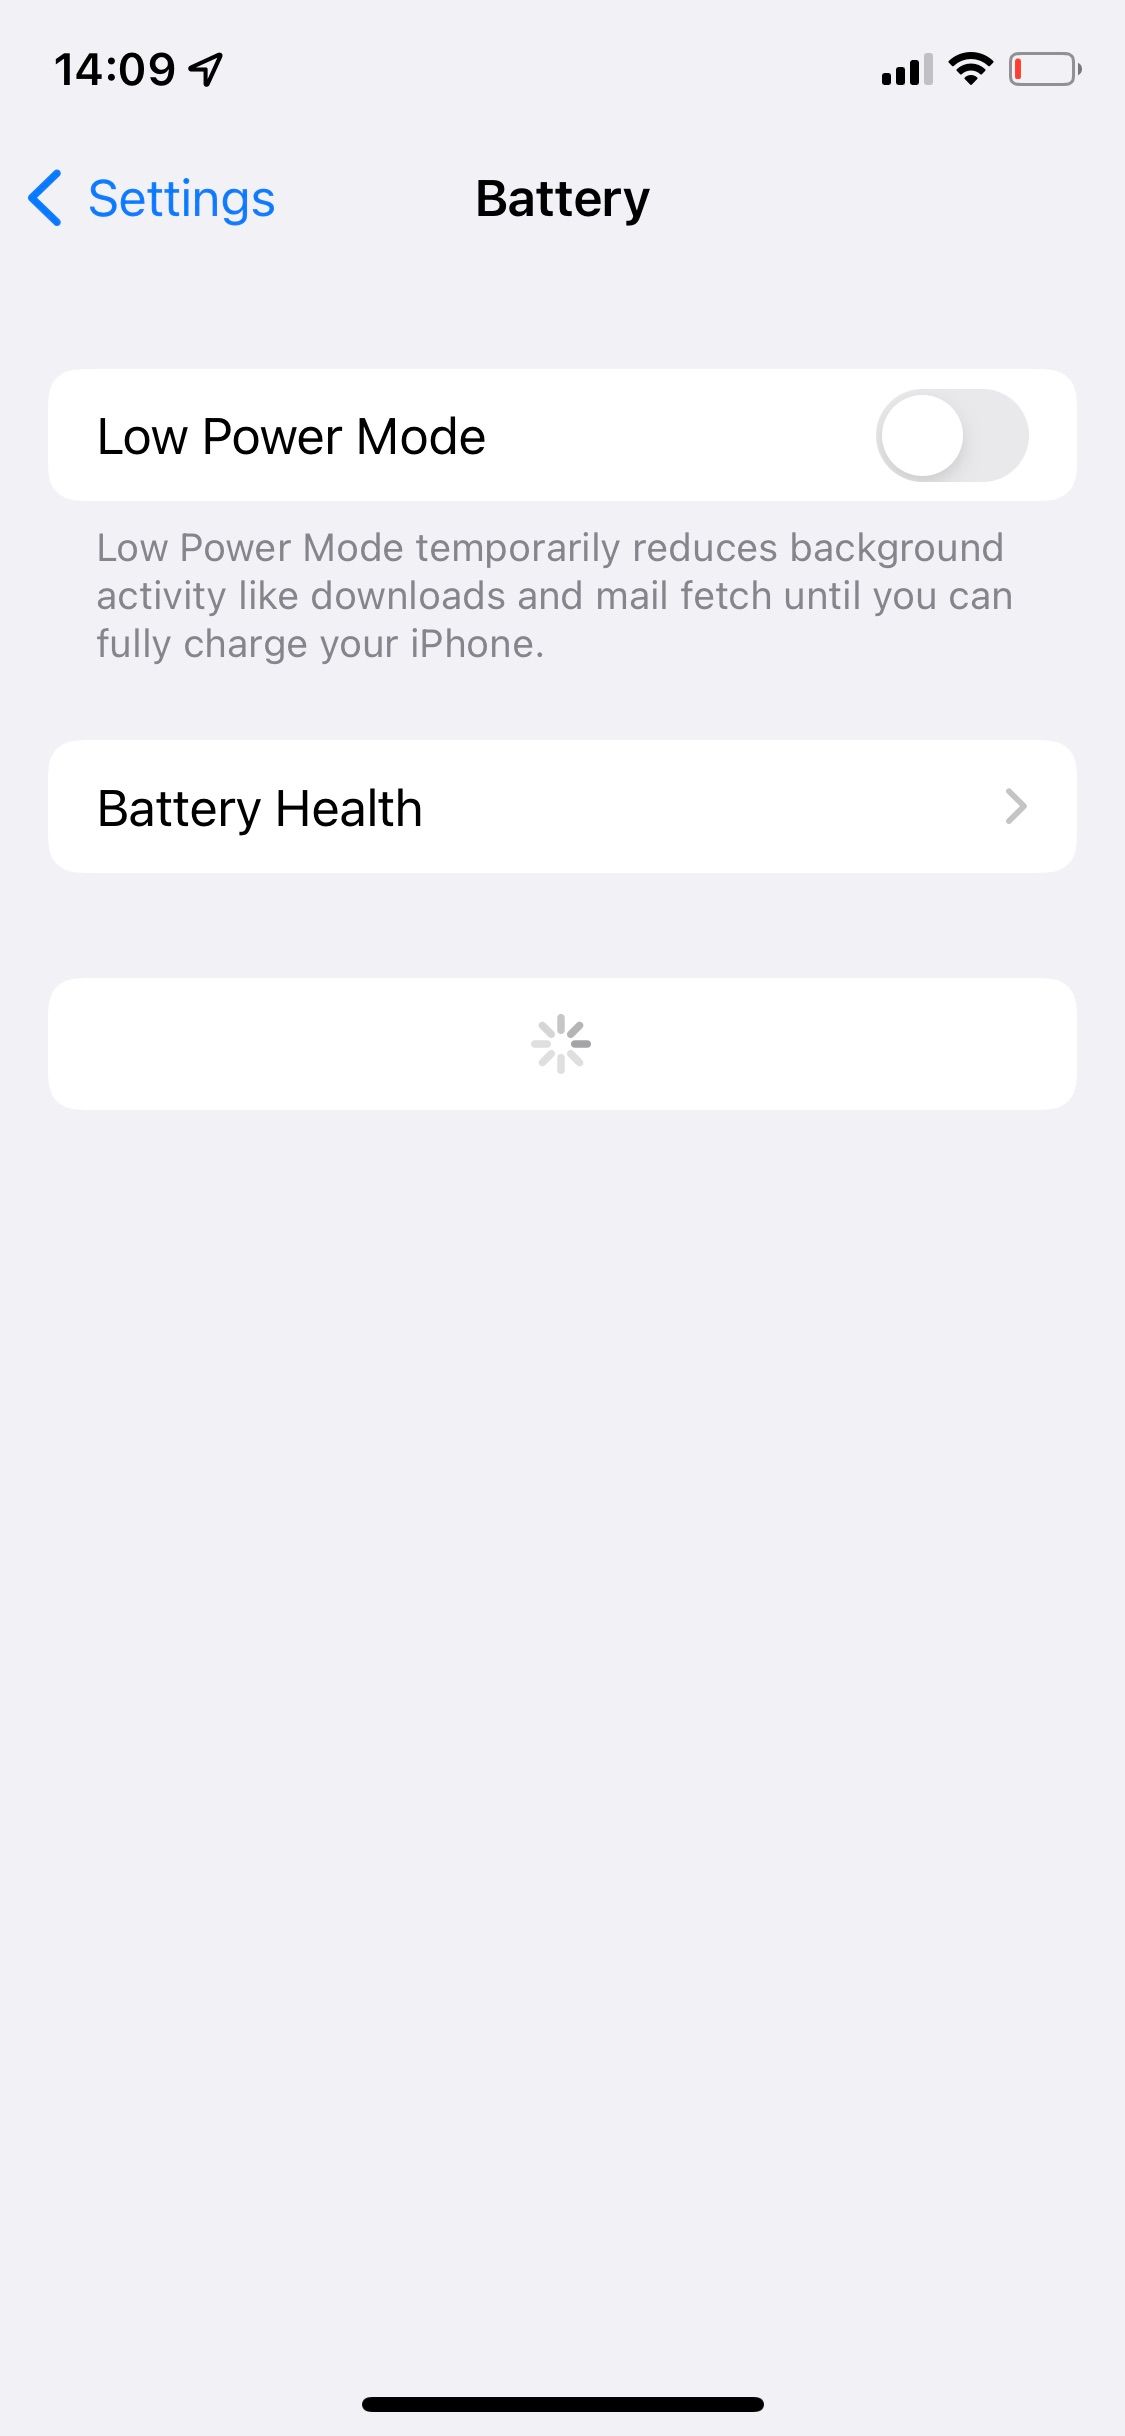 Battery options in the Settings app